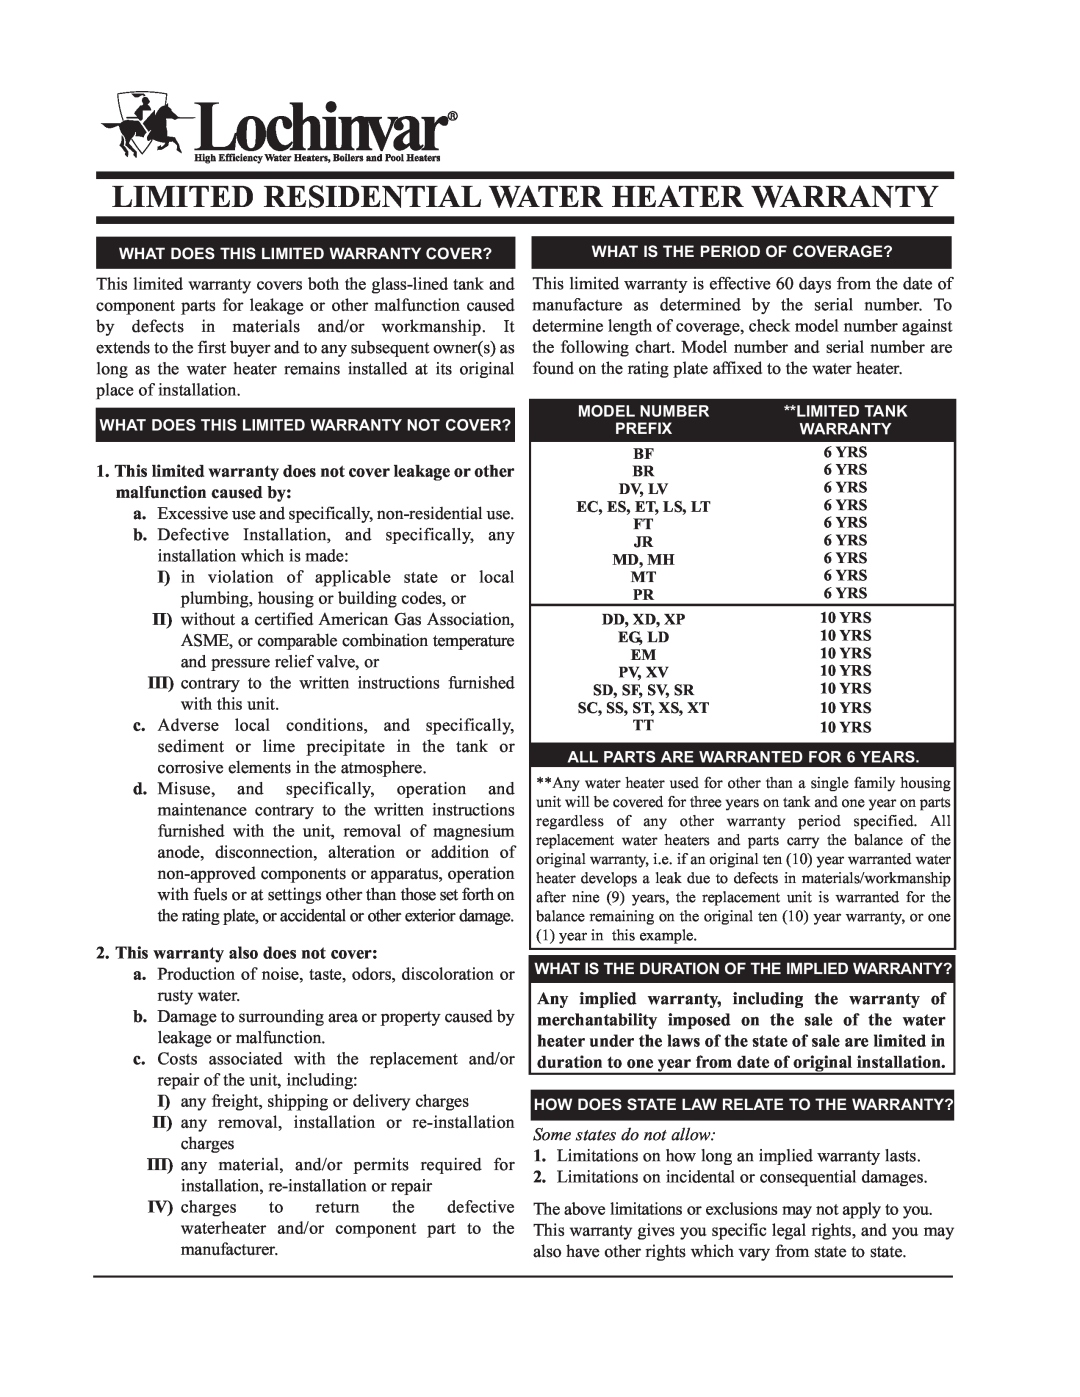 Lochinvar BR, BF, MT, MH, MD, LV, LS, ES, JR, XV, DD warranty Some states do not allow, Limited Residential Water Heater Warranty 